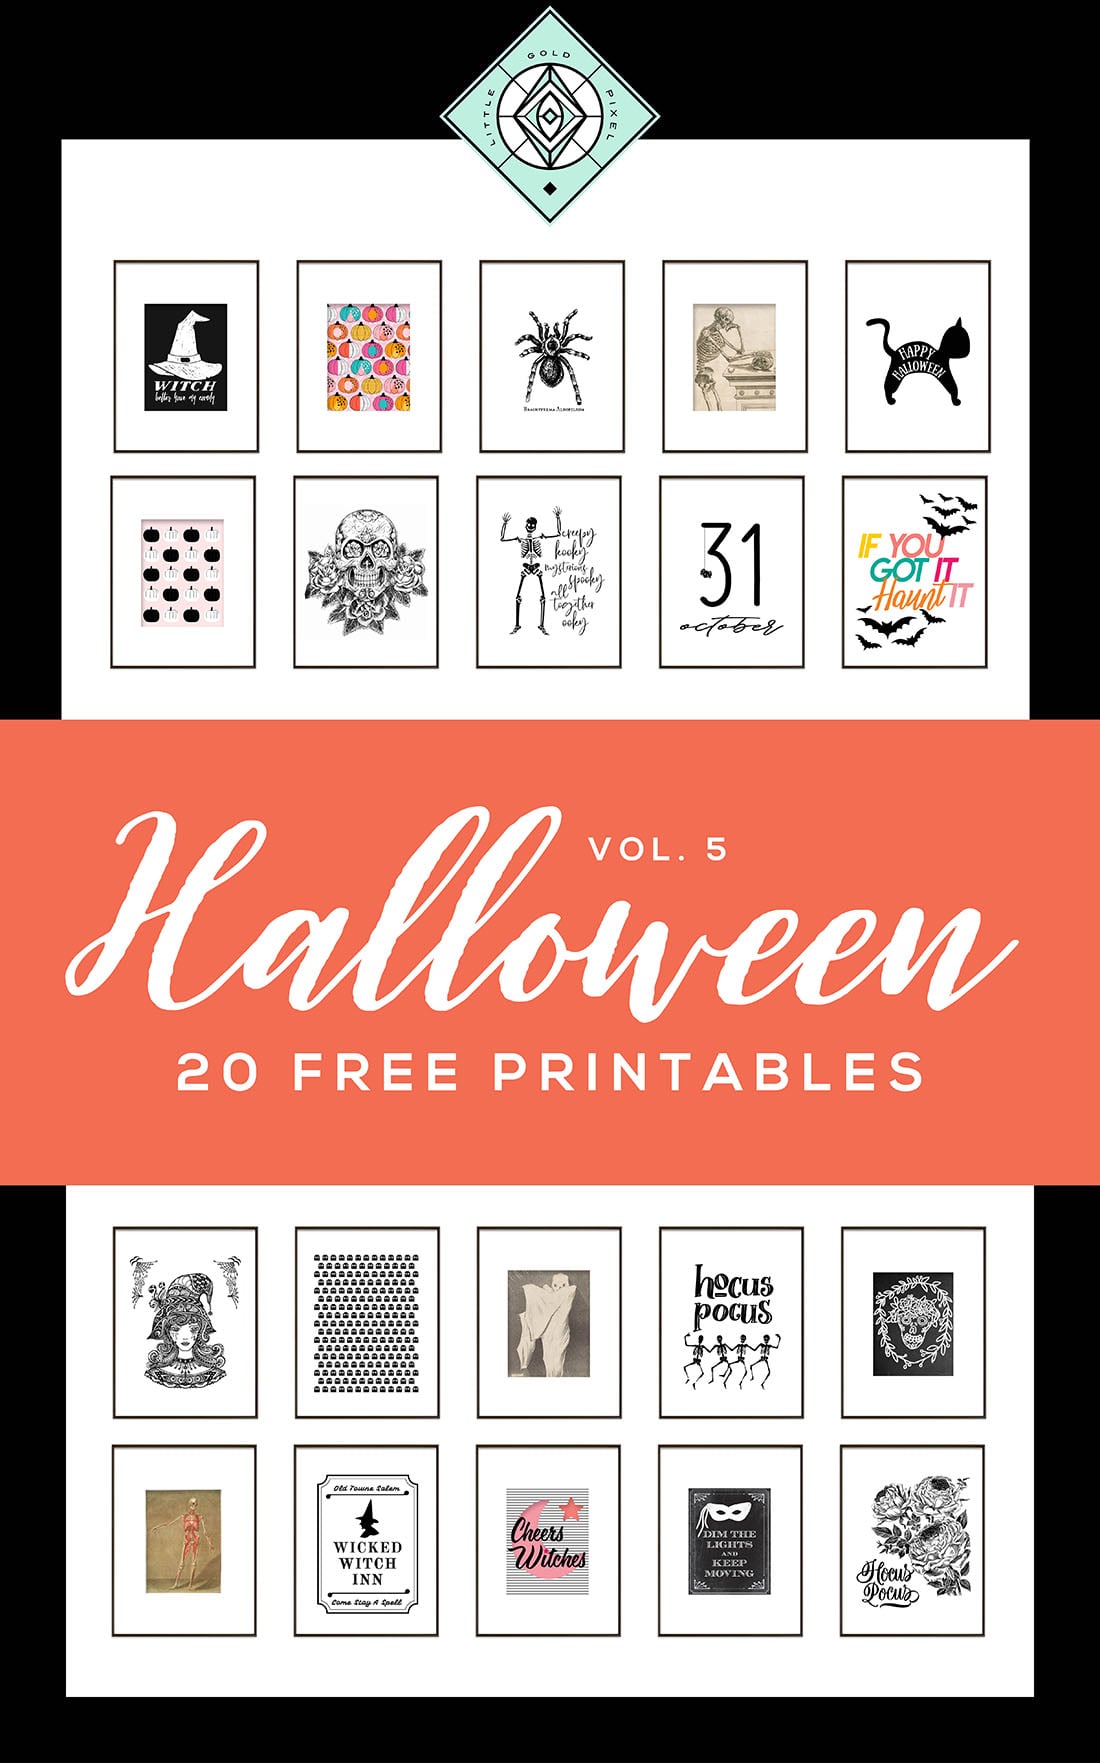 Halloween Free Printables • Vol. 5 Roundup • Little Gold Pixel • In which I round up 20 more free Halloween printables — these are awesome for last-minute decor ideas, printing out on the fly and Halloween parties. #halloween #printables #freeprintables #roundup